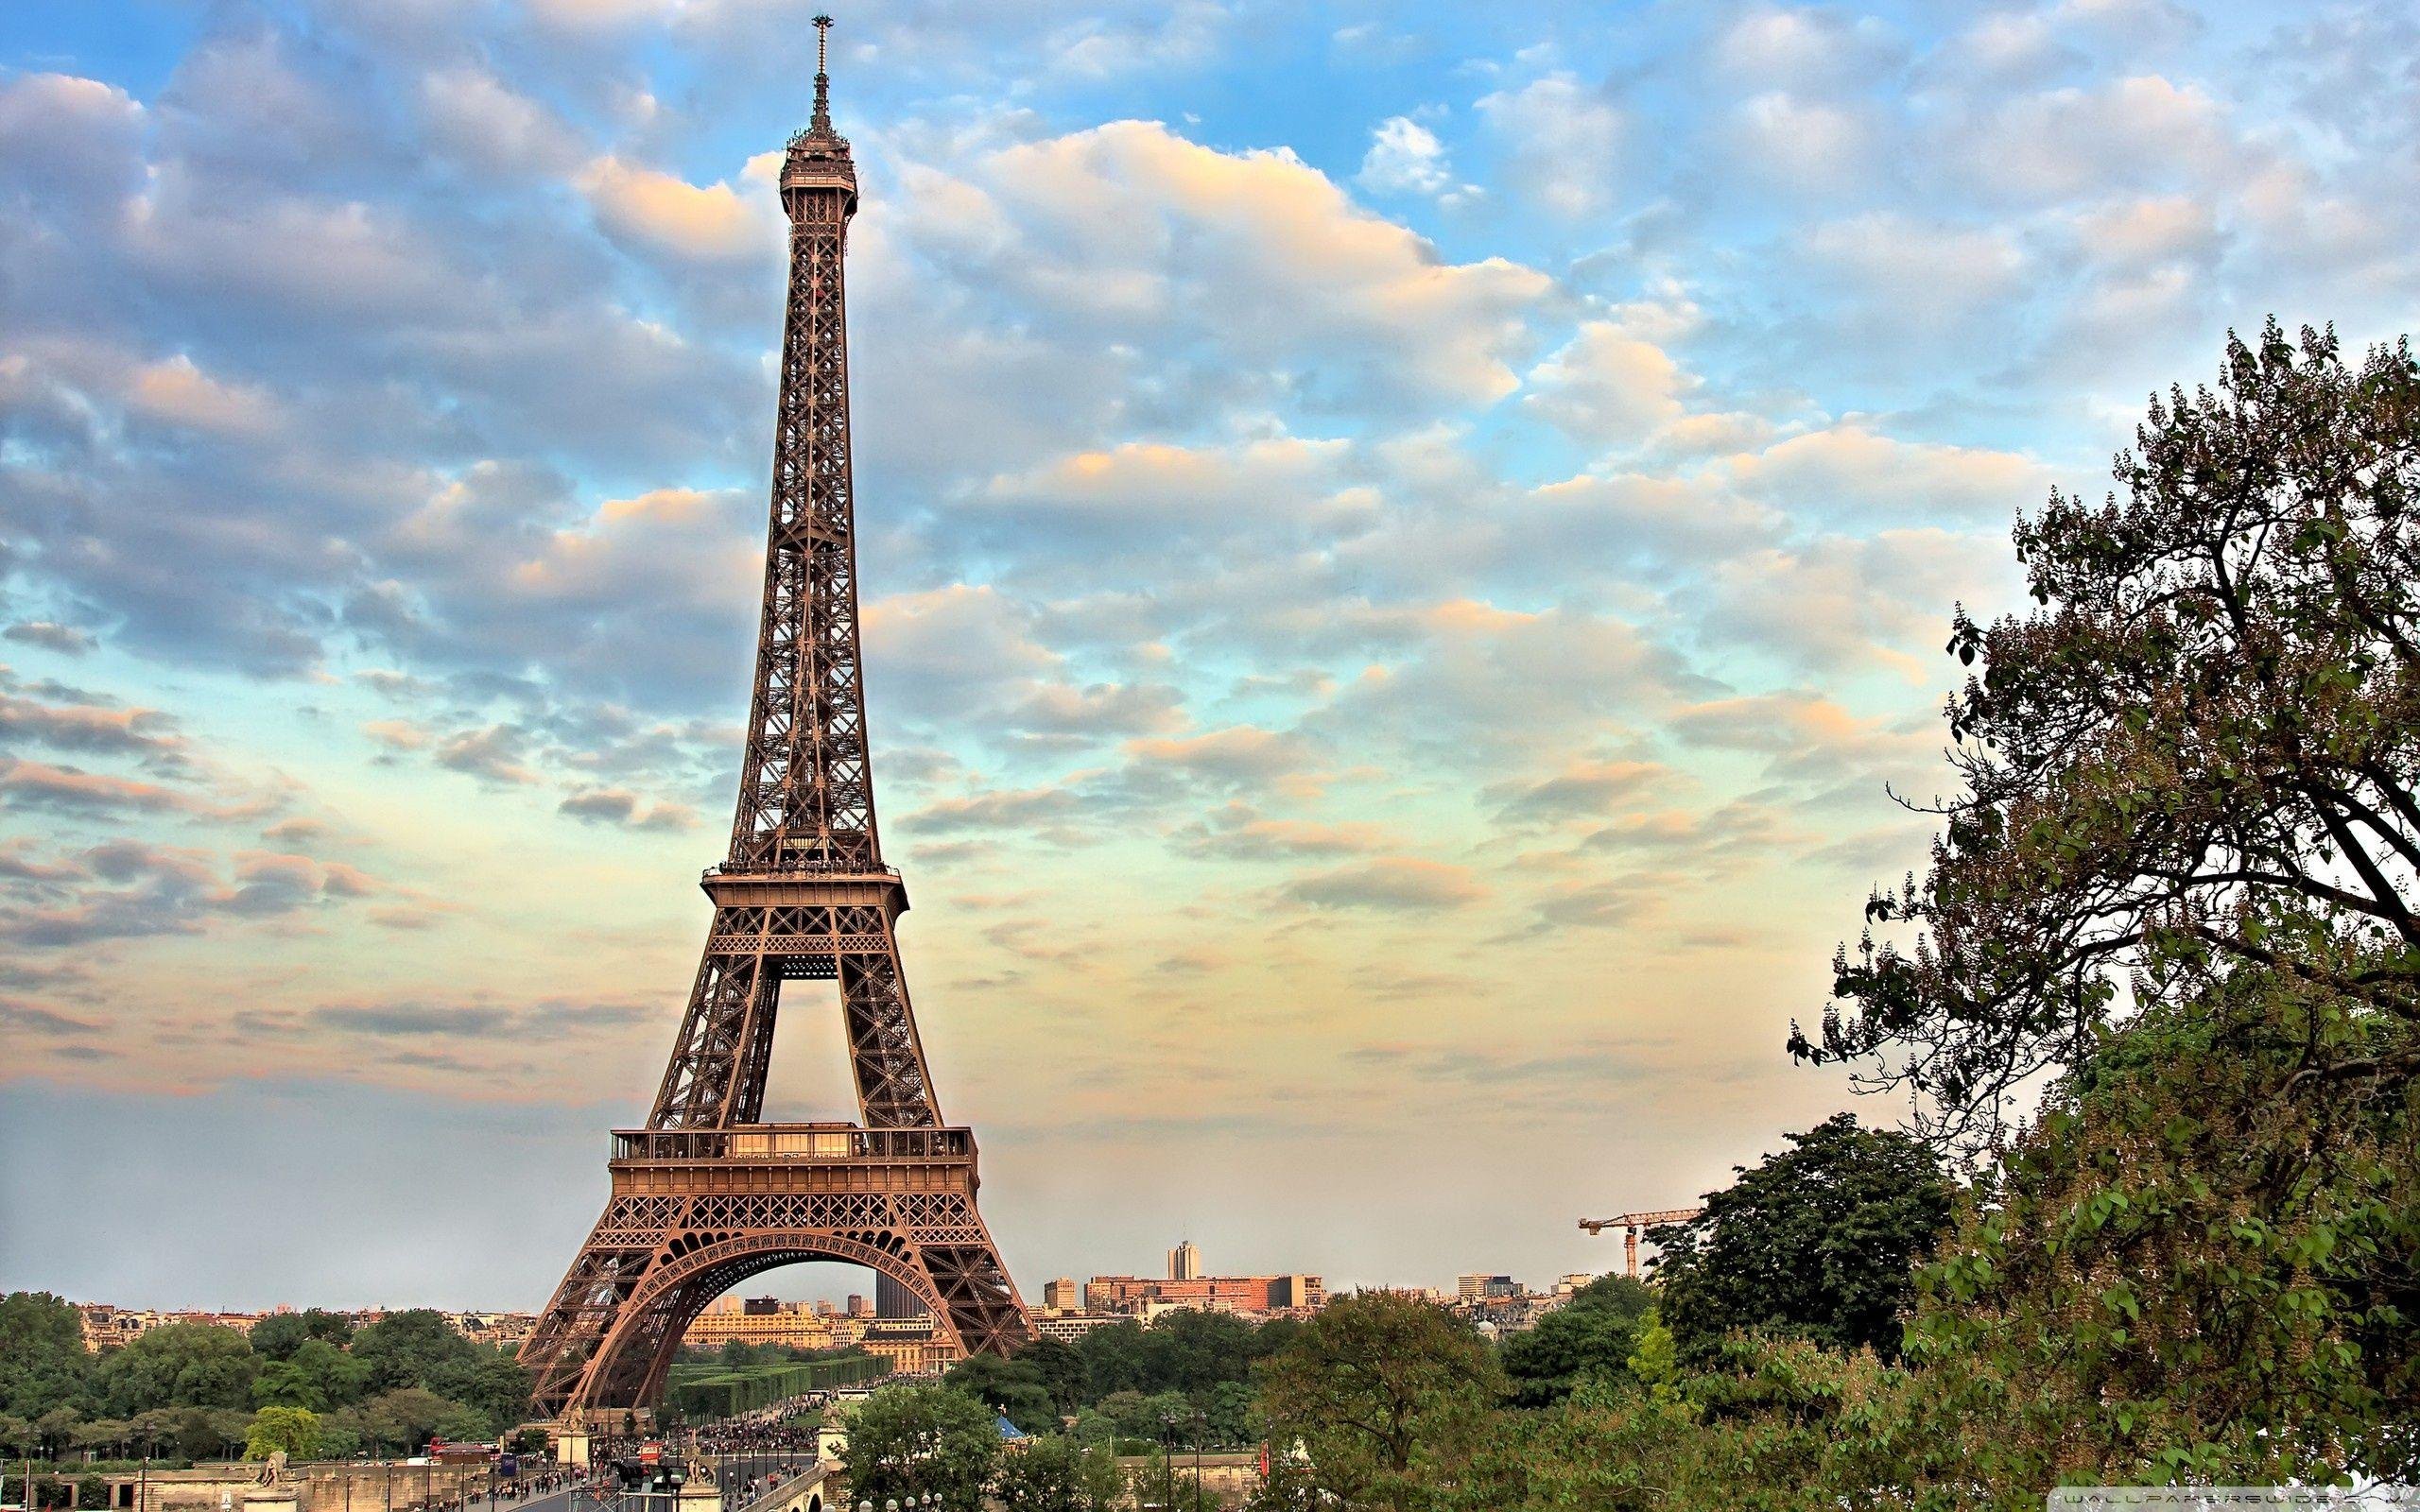 The Eiffel Tower Wallpapers Full HD 